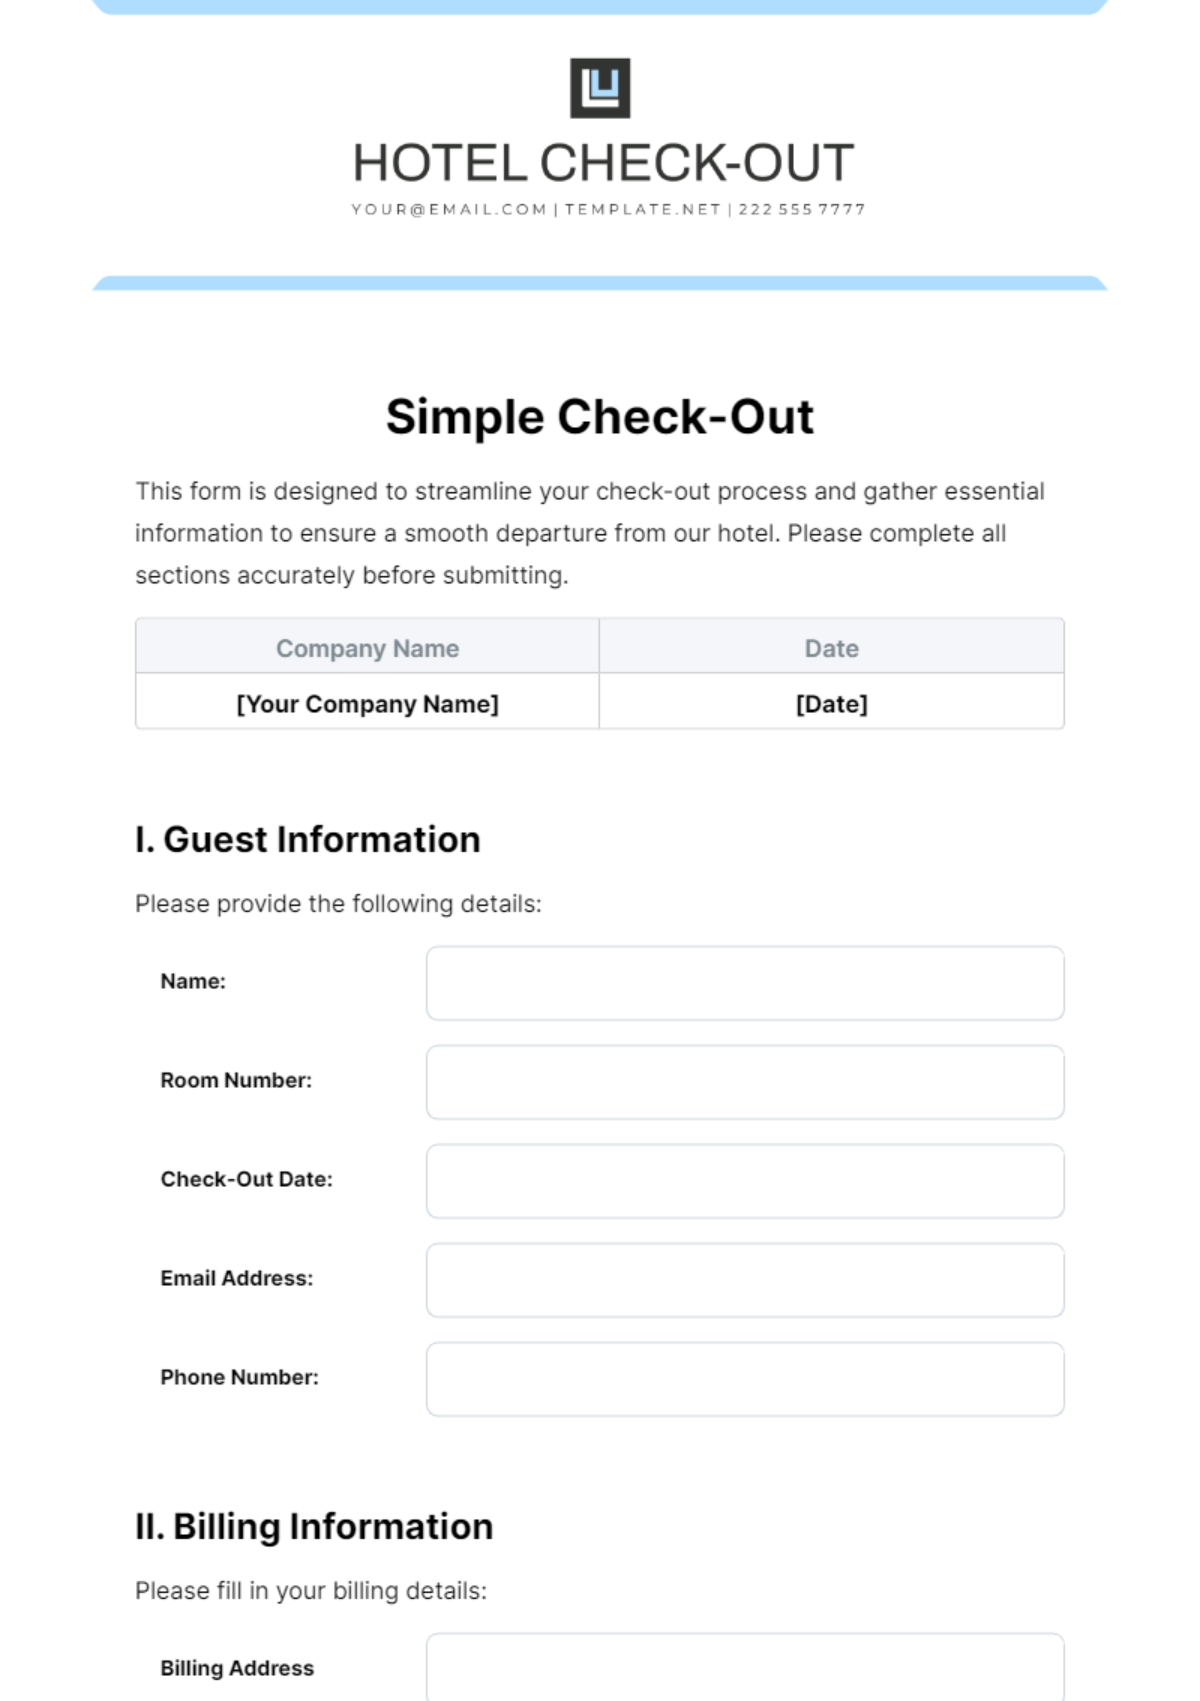 Simple Check-Out Template